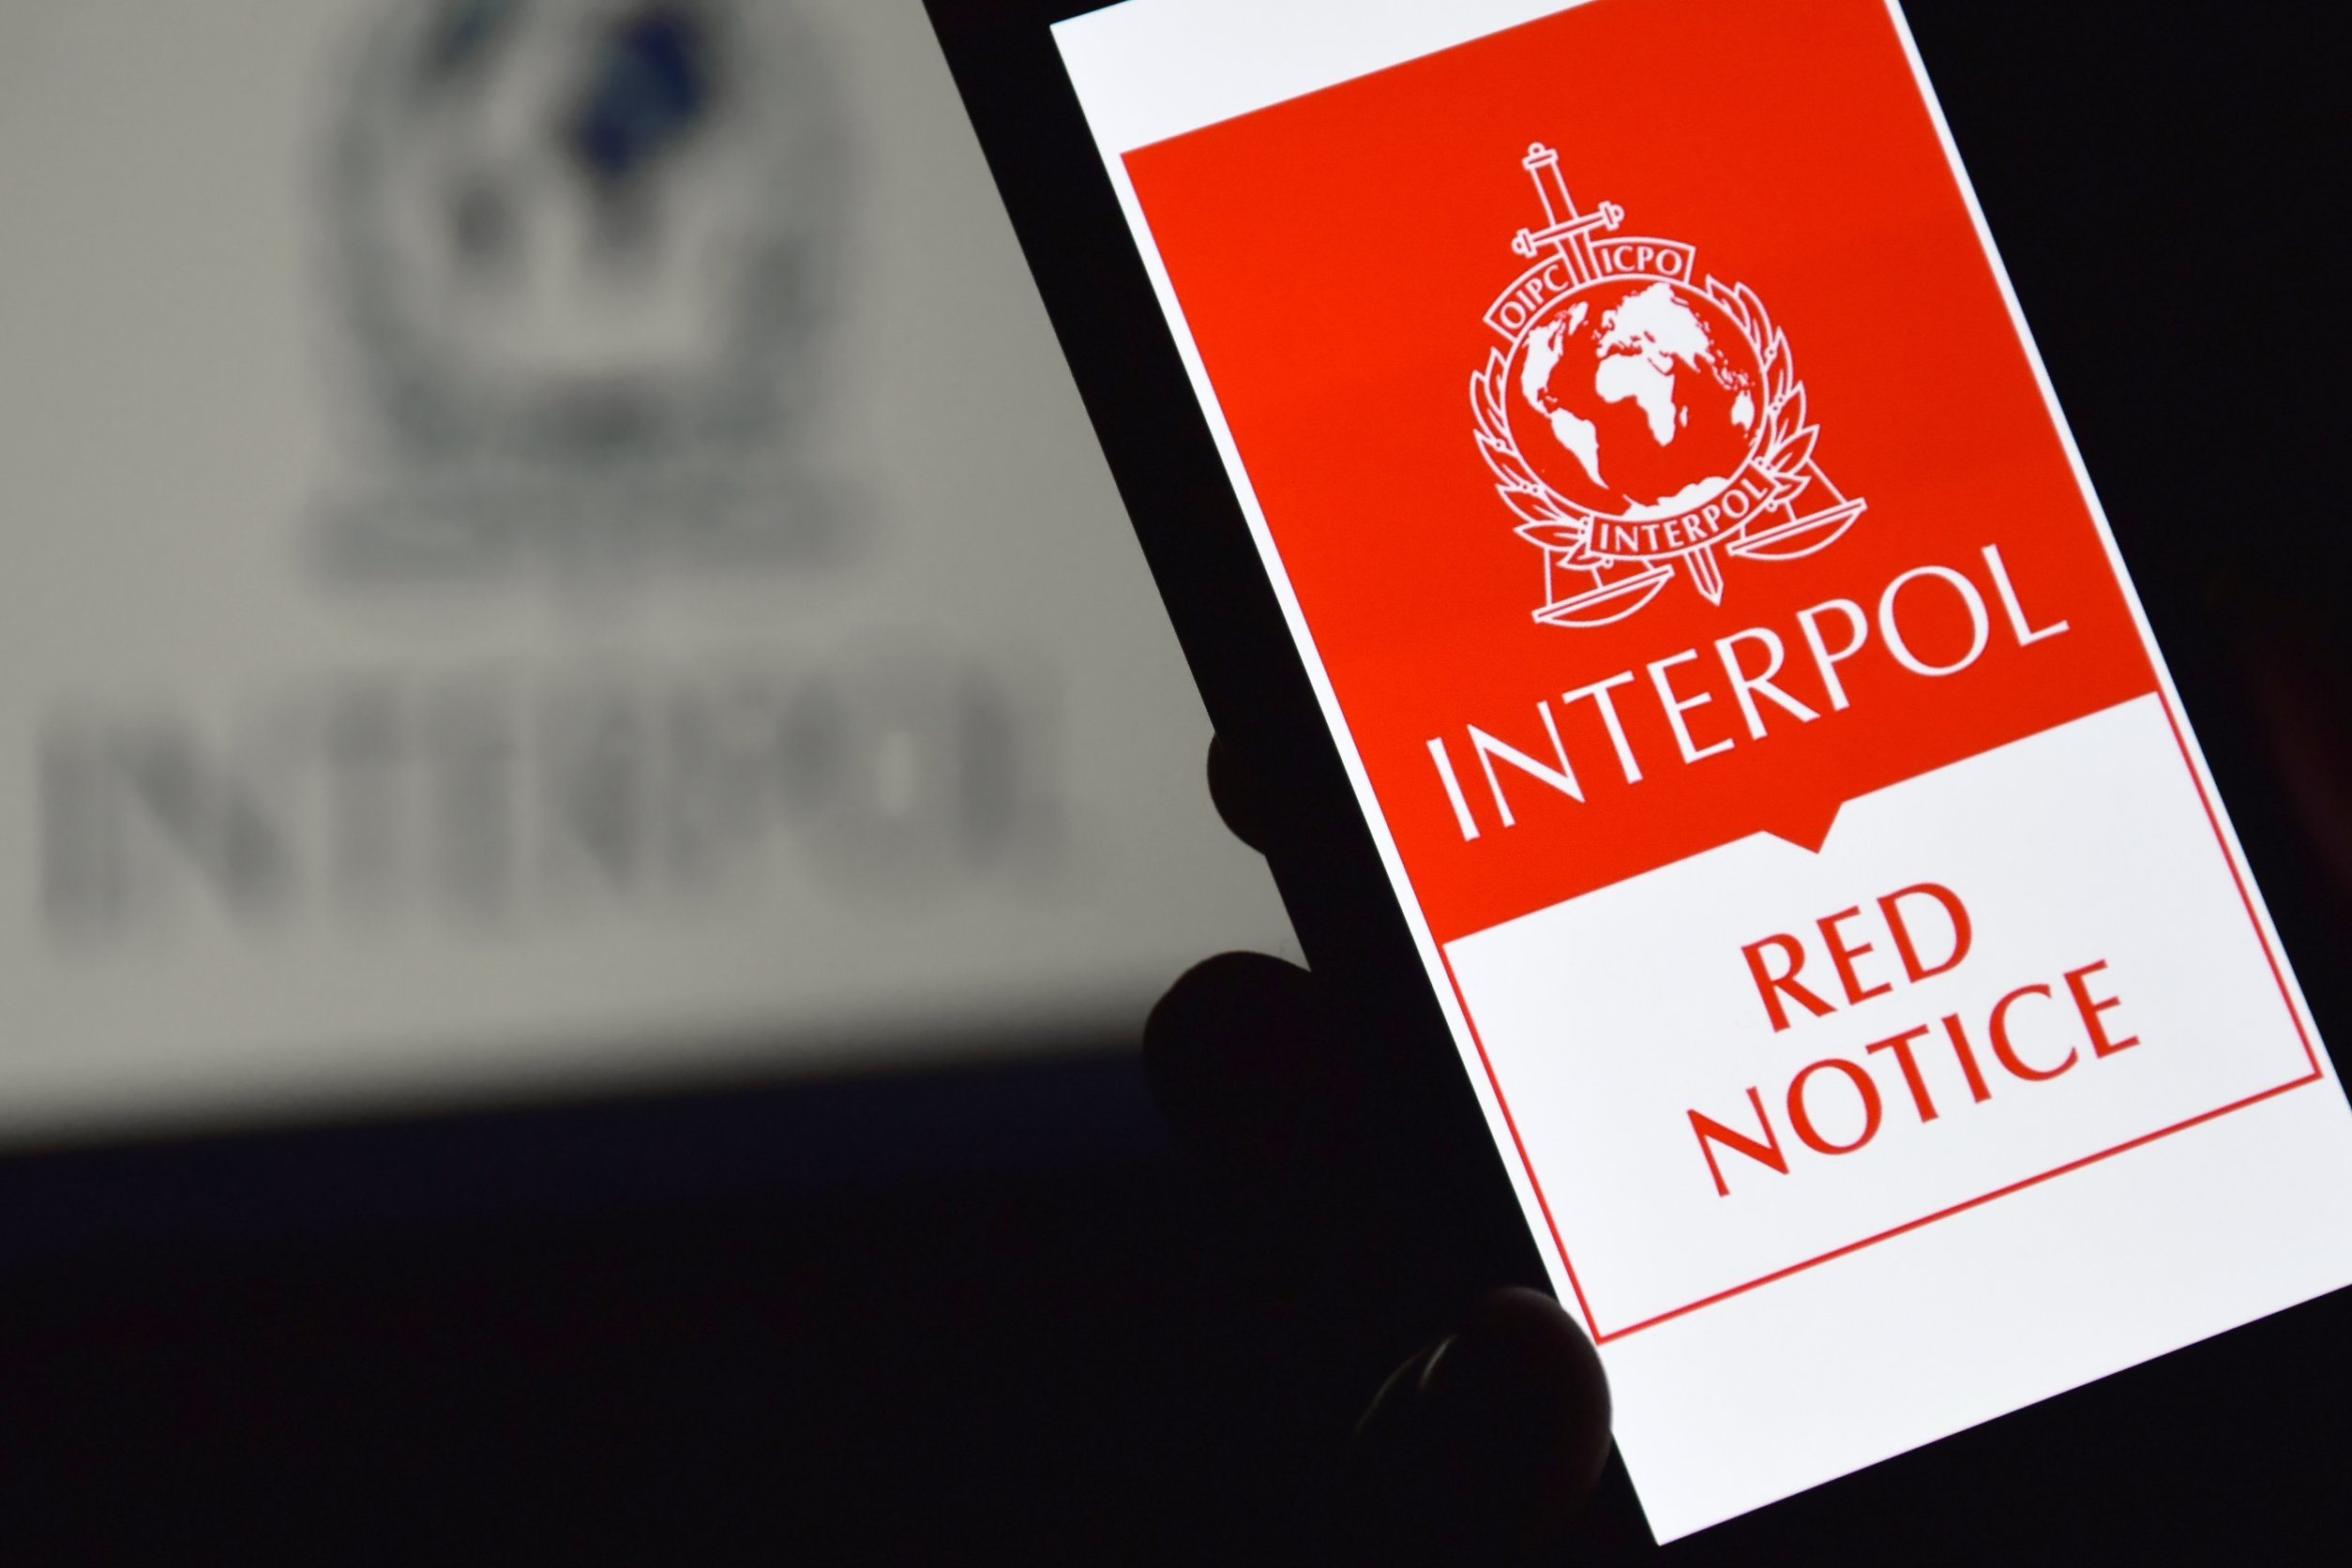 interpol red notice Do Kwon a wanted man as Interpol issues ‘Red Notice’